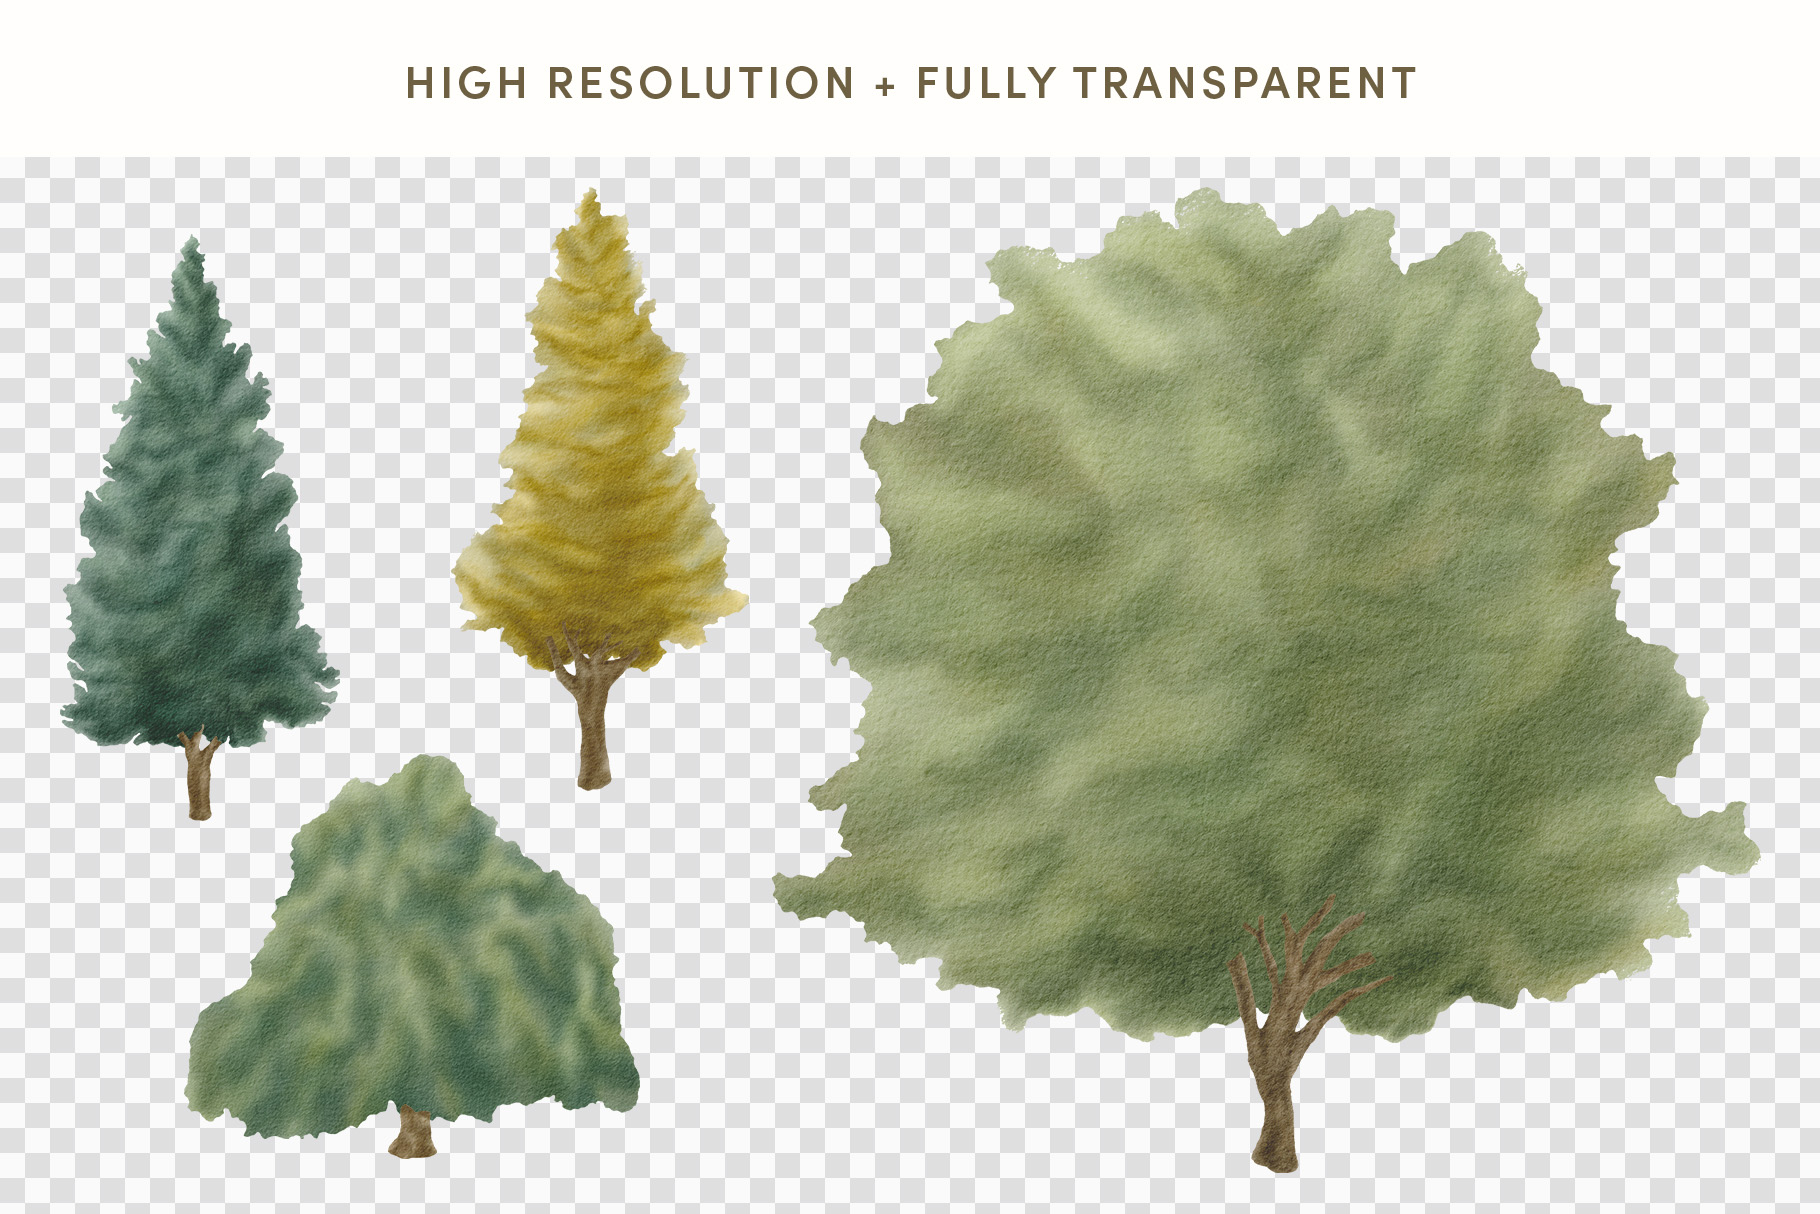 Watercolor Trees Illustration Set (PSD, PNG Format)